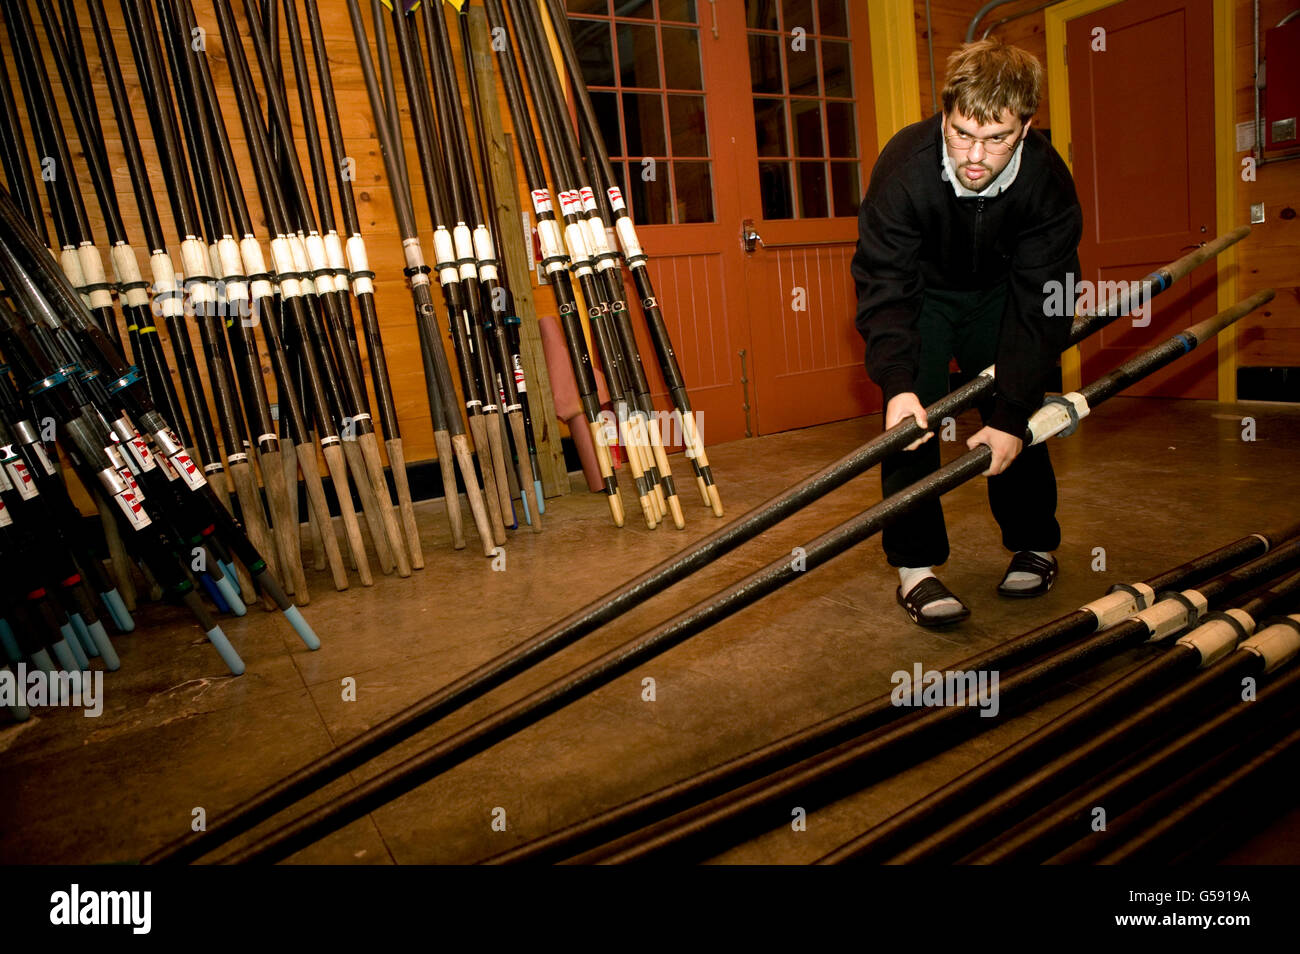 A Manhattan College Rowing Club member prepares oars at the Peter Jay Sharp boathouse, Harlem River, New York, 11 November 2004 Stock Photo